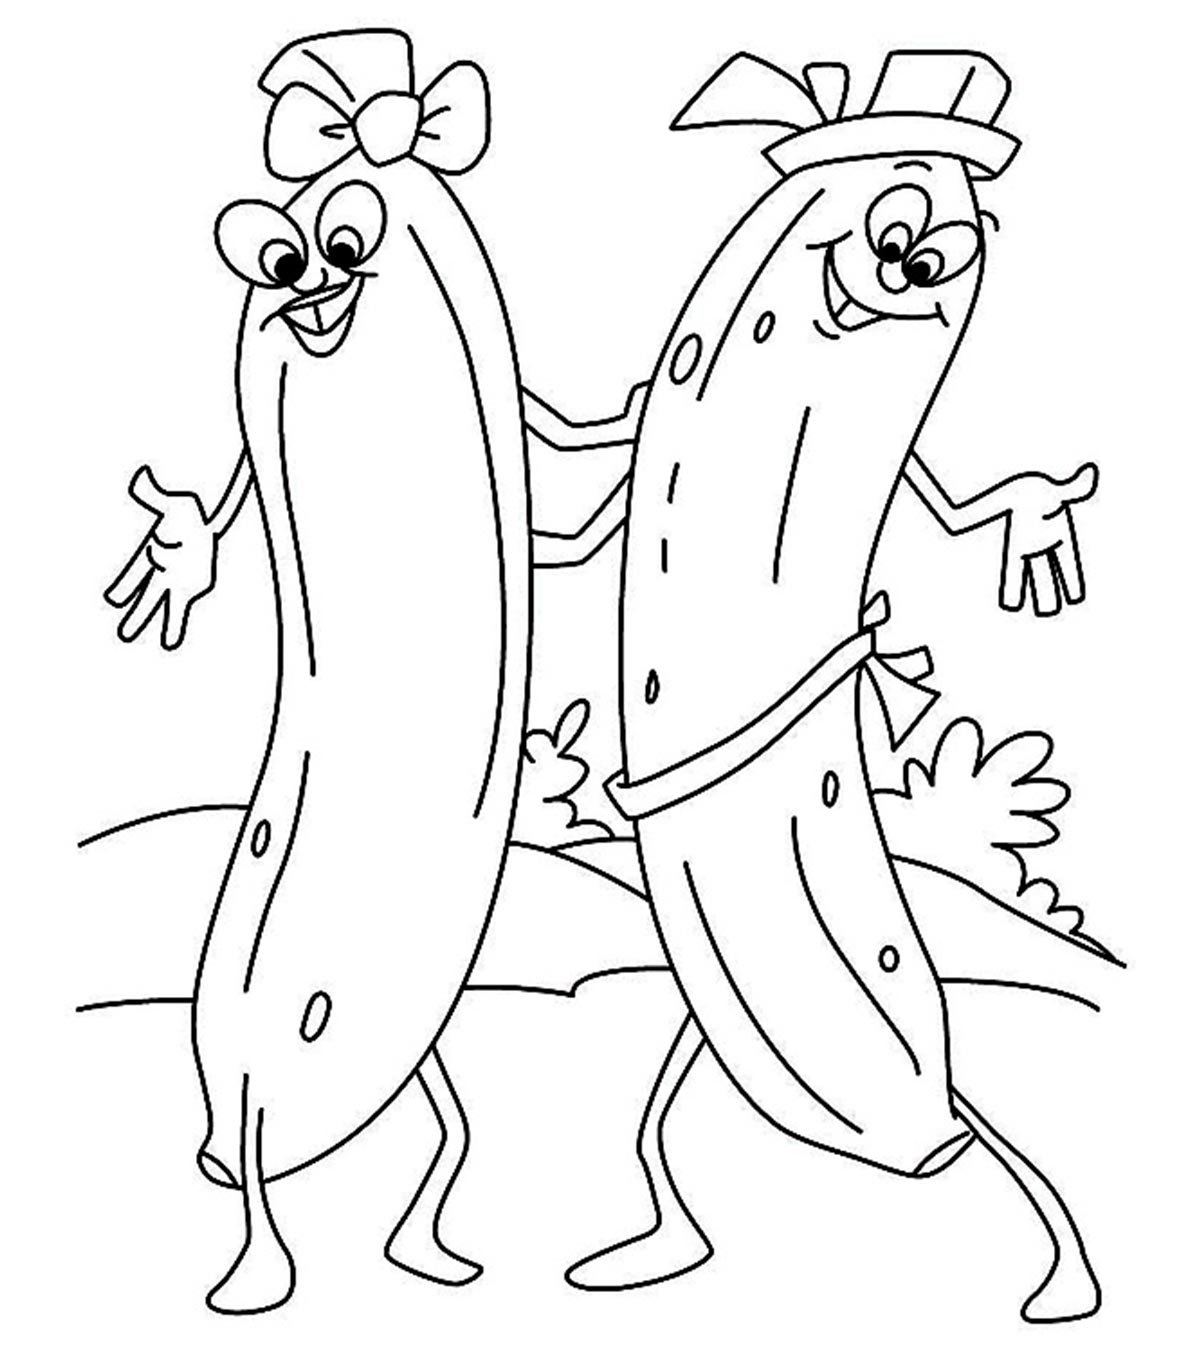 Top 25 Banana Coloring Pages Your Toddler Will Love To